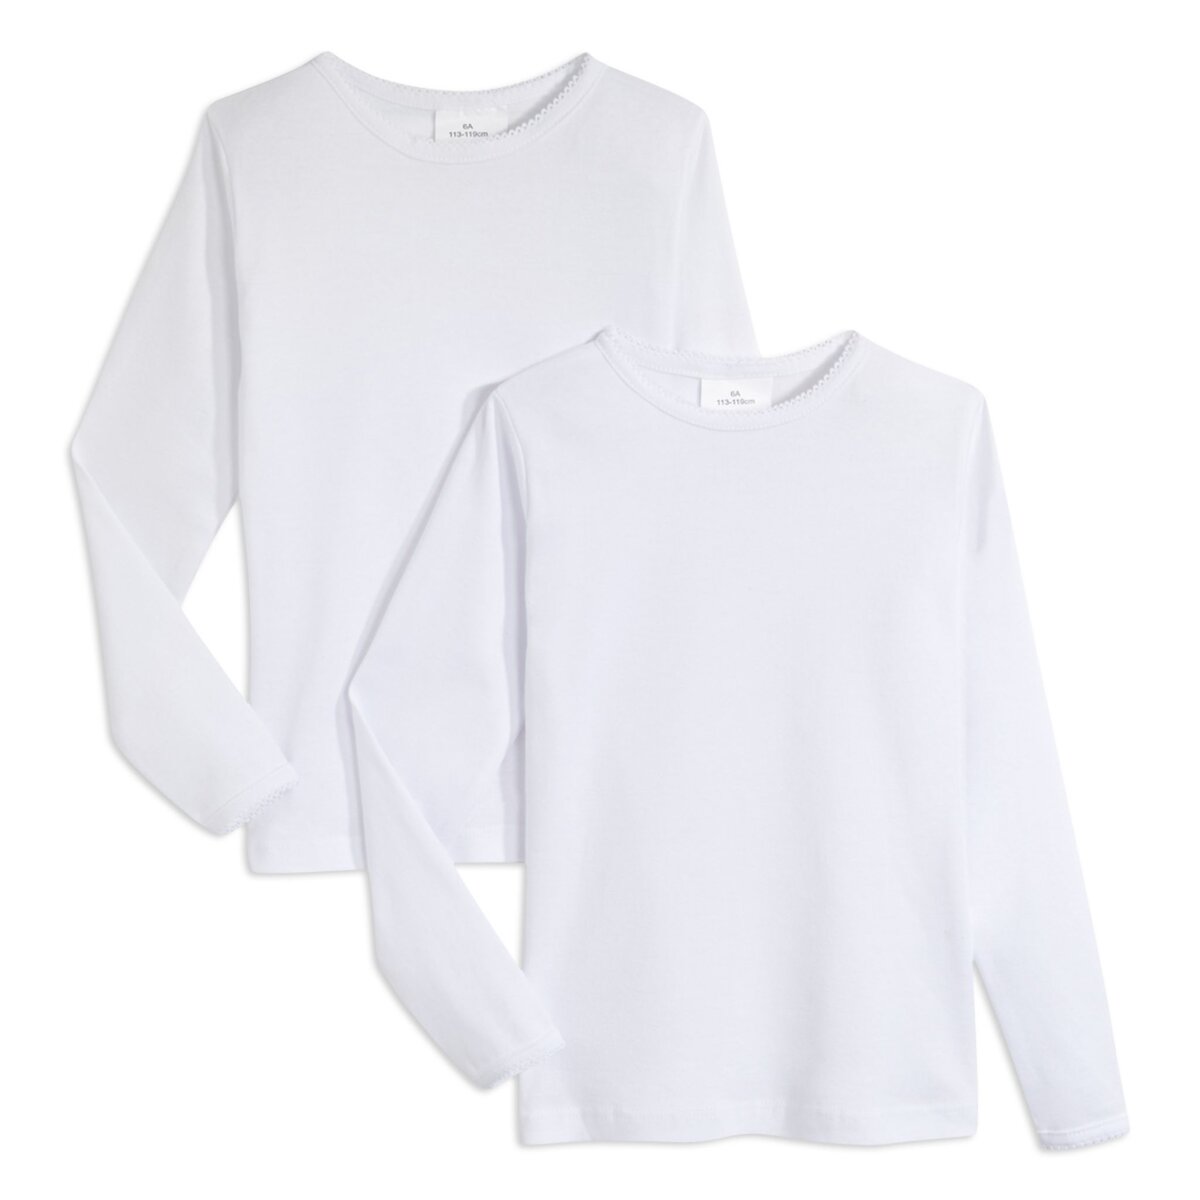 IN EXTENSO Lot de 2 tee-shirt manches longues fille 